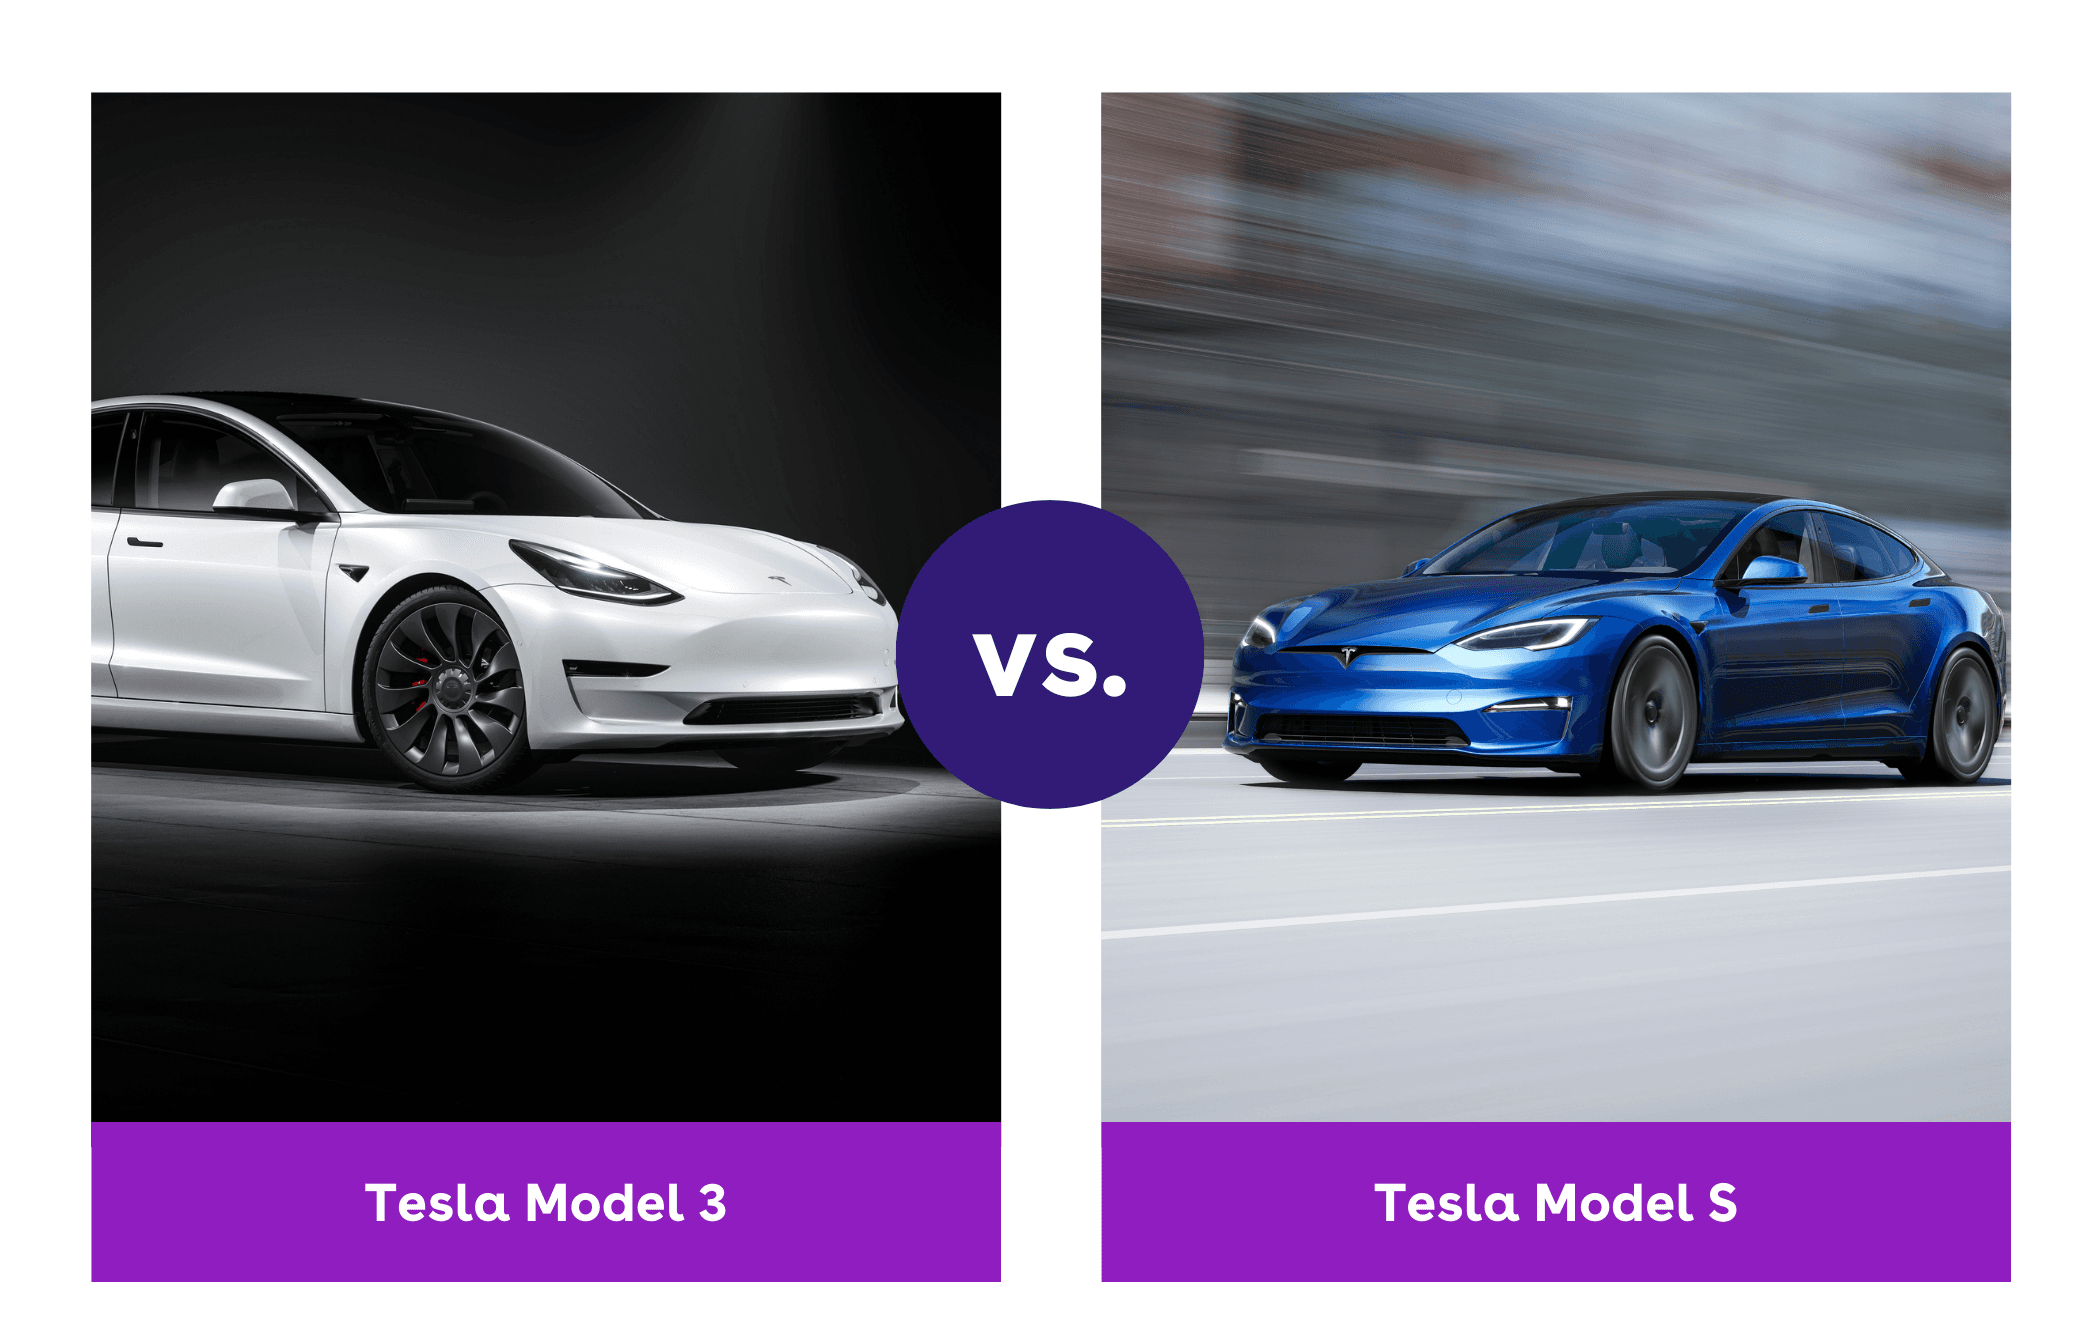 on the left is a white tesla model 3 and on the right is a blue tesla model s driving on a road